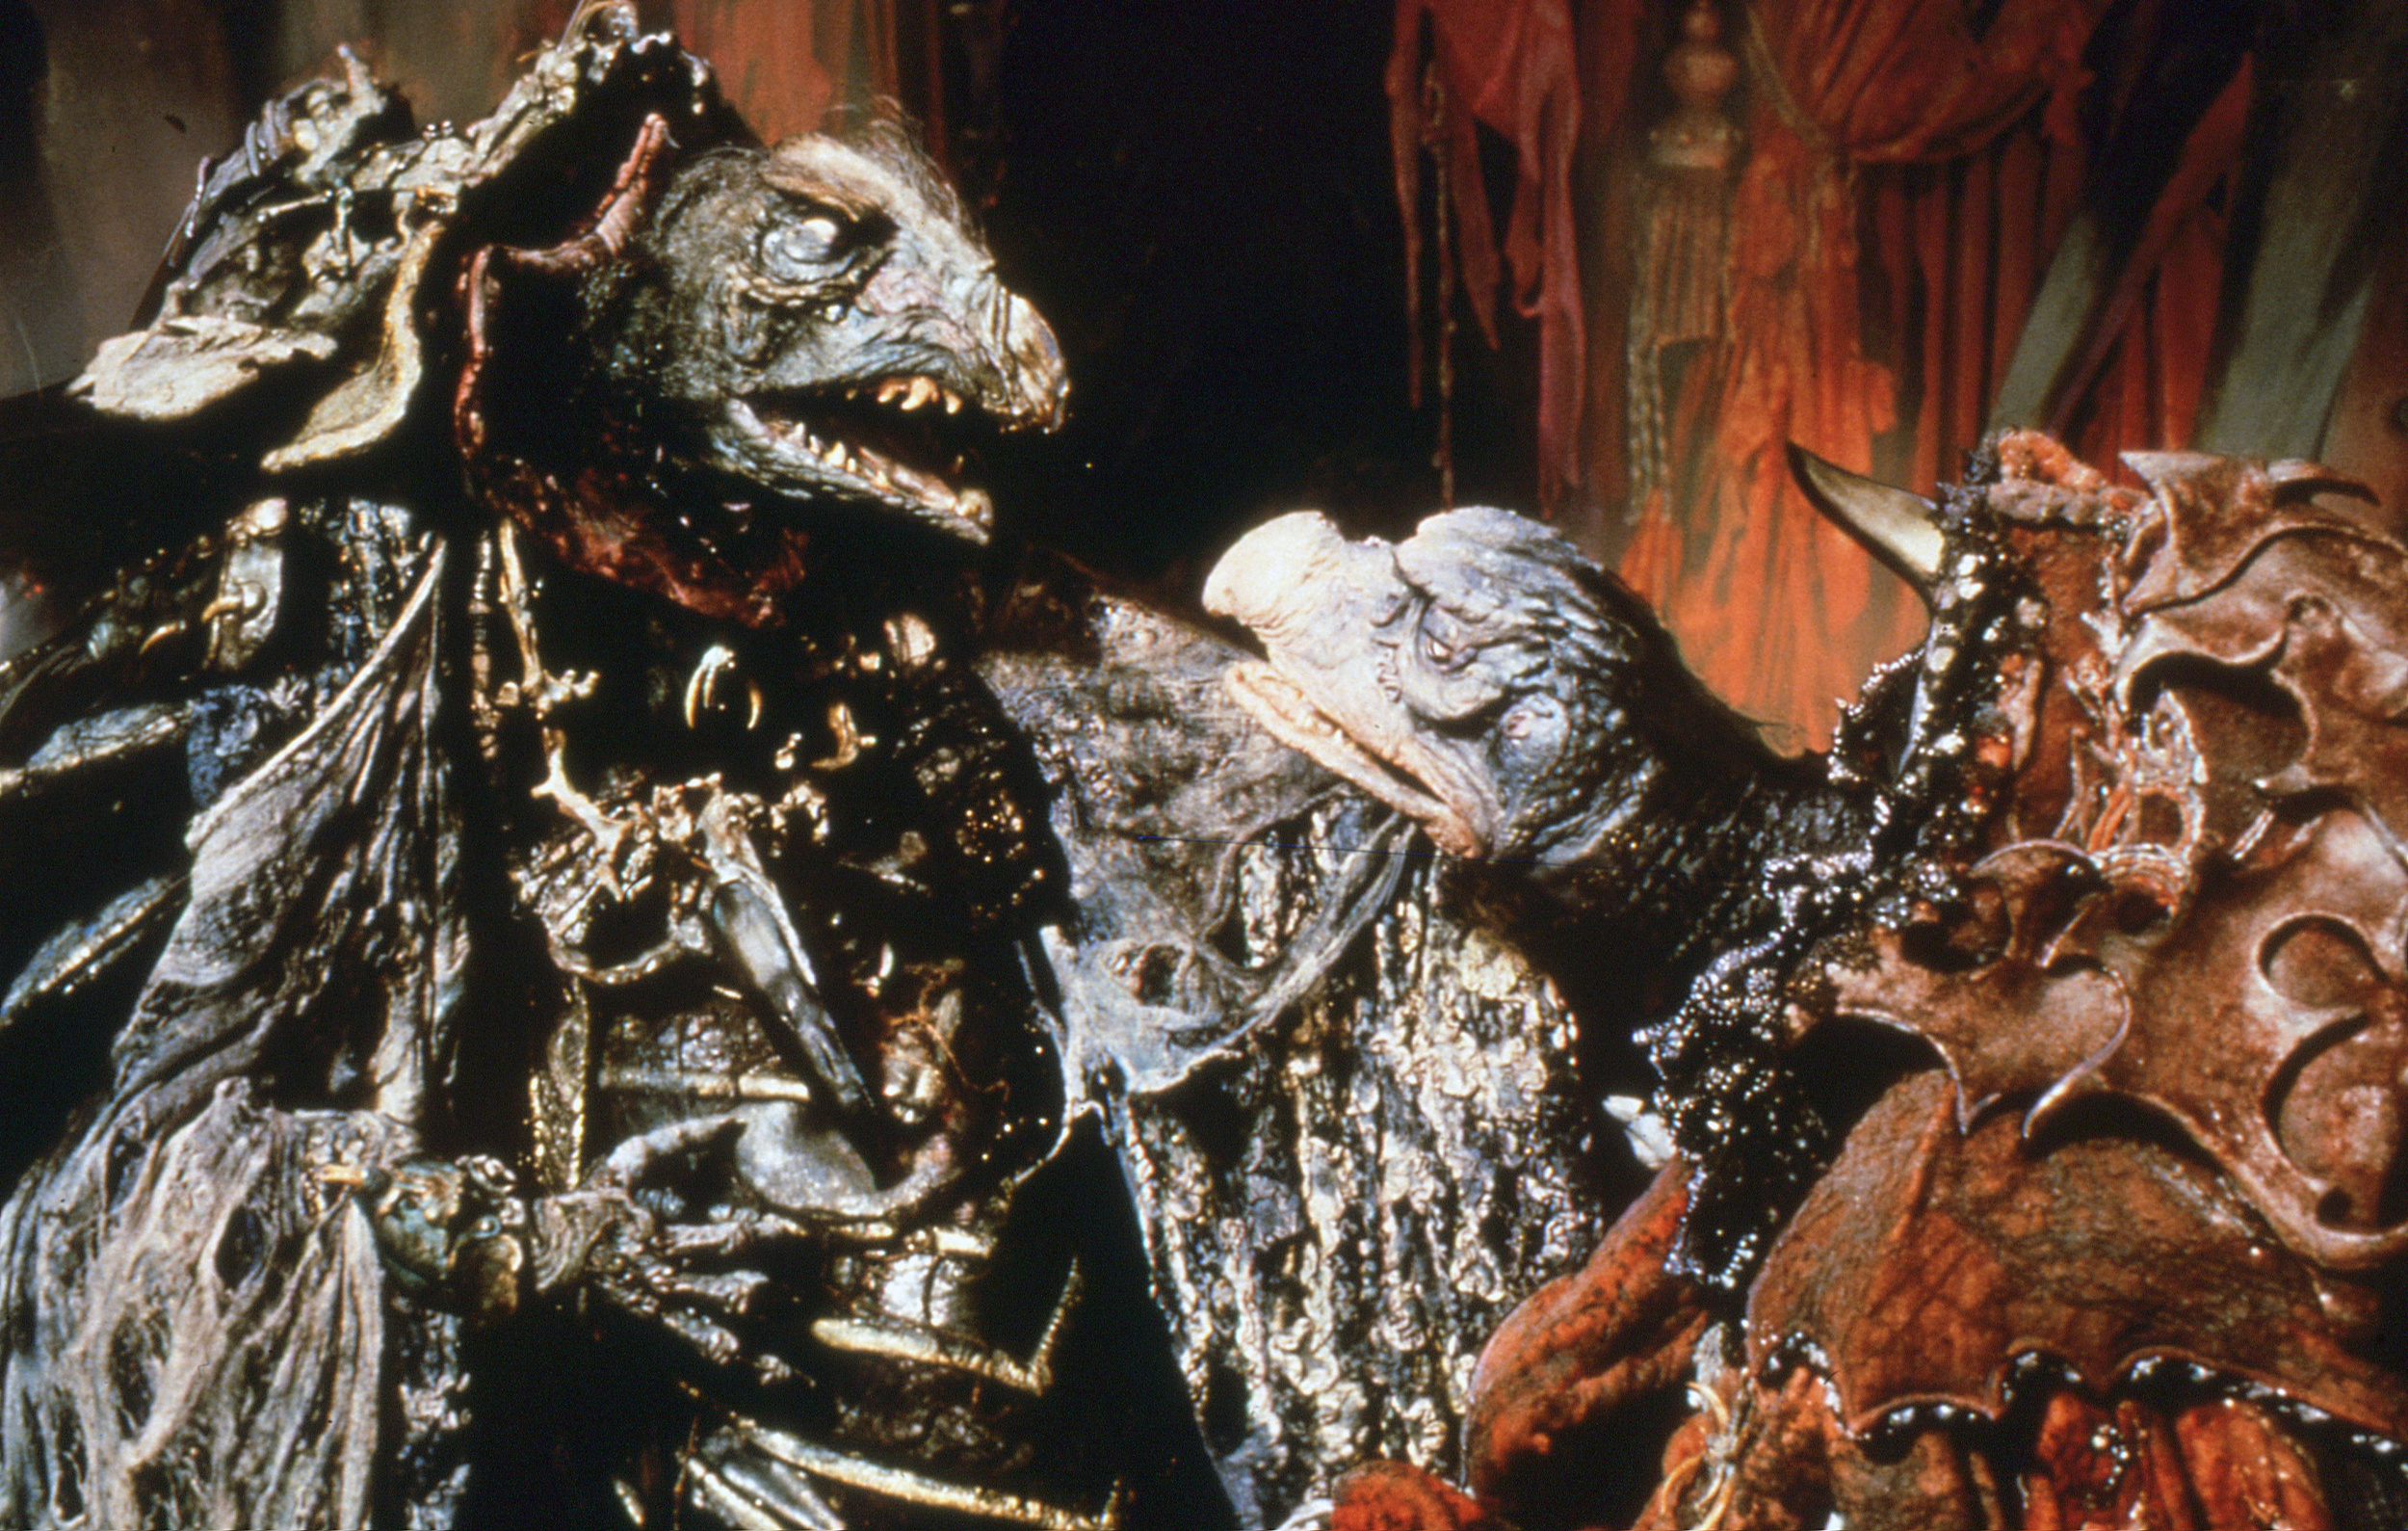 <p>Though he might be most famous for creating the Muppets, Jim Henson also deserves a great deal of credit for <span><em>The Dark Crystal</em>, </span>one of the strangest films from the 1980s. With its story about two Gelflings who try to defeat a race of malevolent beings known as Skeksis, it has all of the trappings of an epic fantasy story. The film is a work of extraordinary artistry, but it also contains an emotional intensity that befuddled contemporary critics, who judged it against Henson’s other, more light-hearted fare. Fortunately, the film has come to be regarded as the true work of art that it is.</p><p>You may also like: <a href='https://www.yardbarker.com/entertainment/articles/20_films_with_the_most_memorable_twist_endings/s1__39034195'>20 films with the most memorable twist endings</a></p>